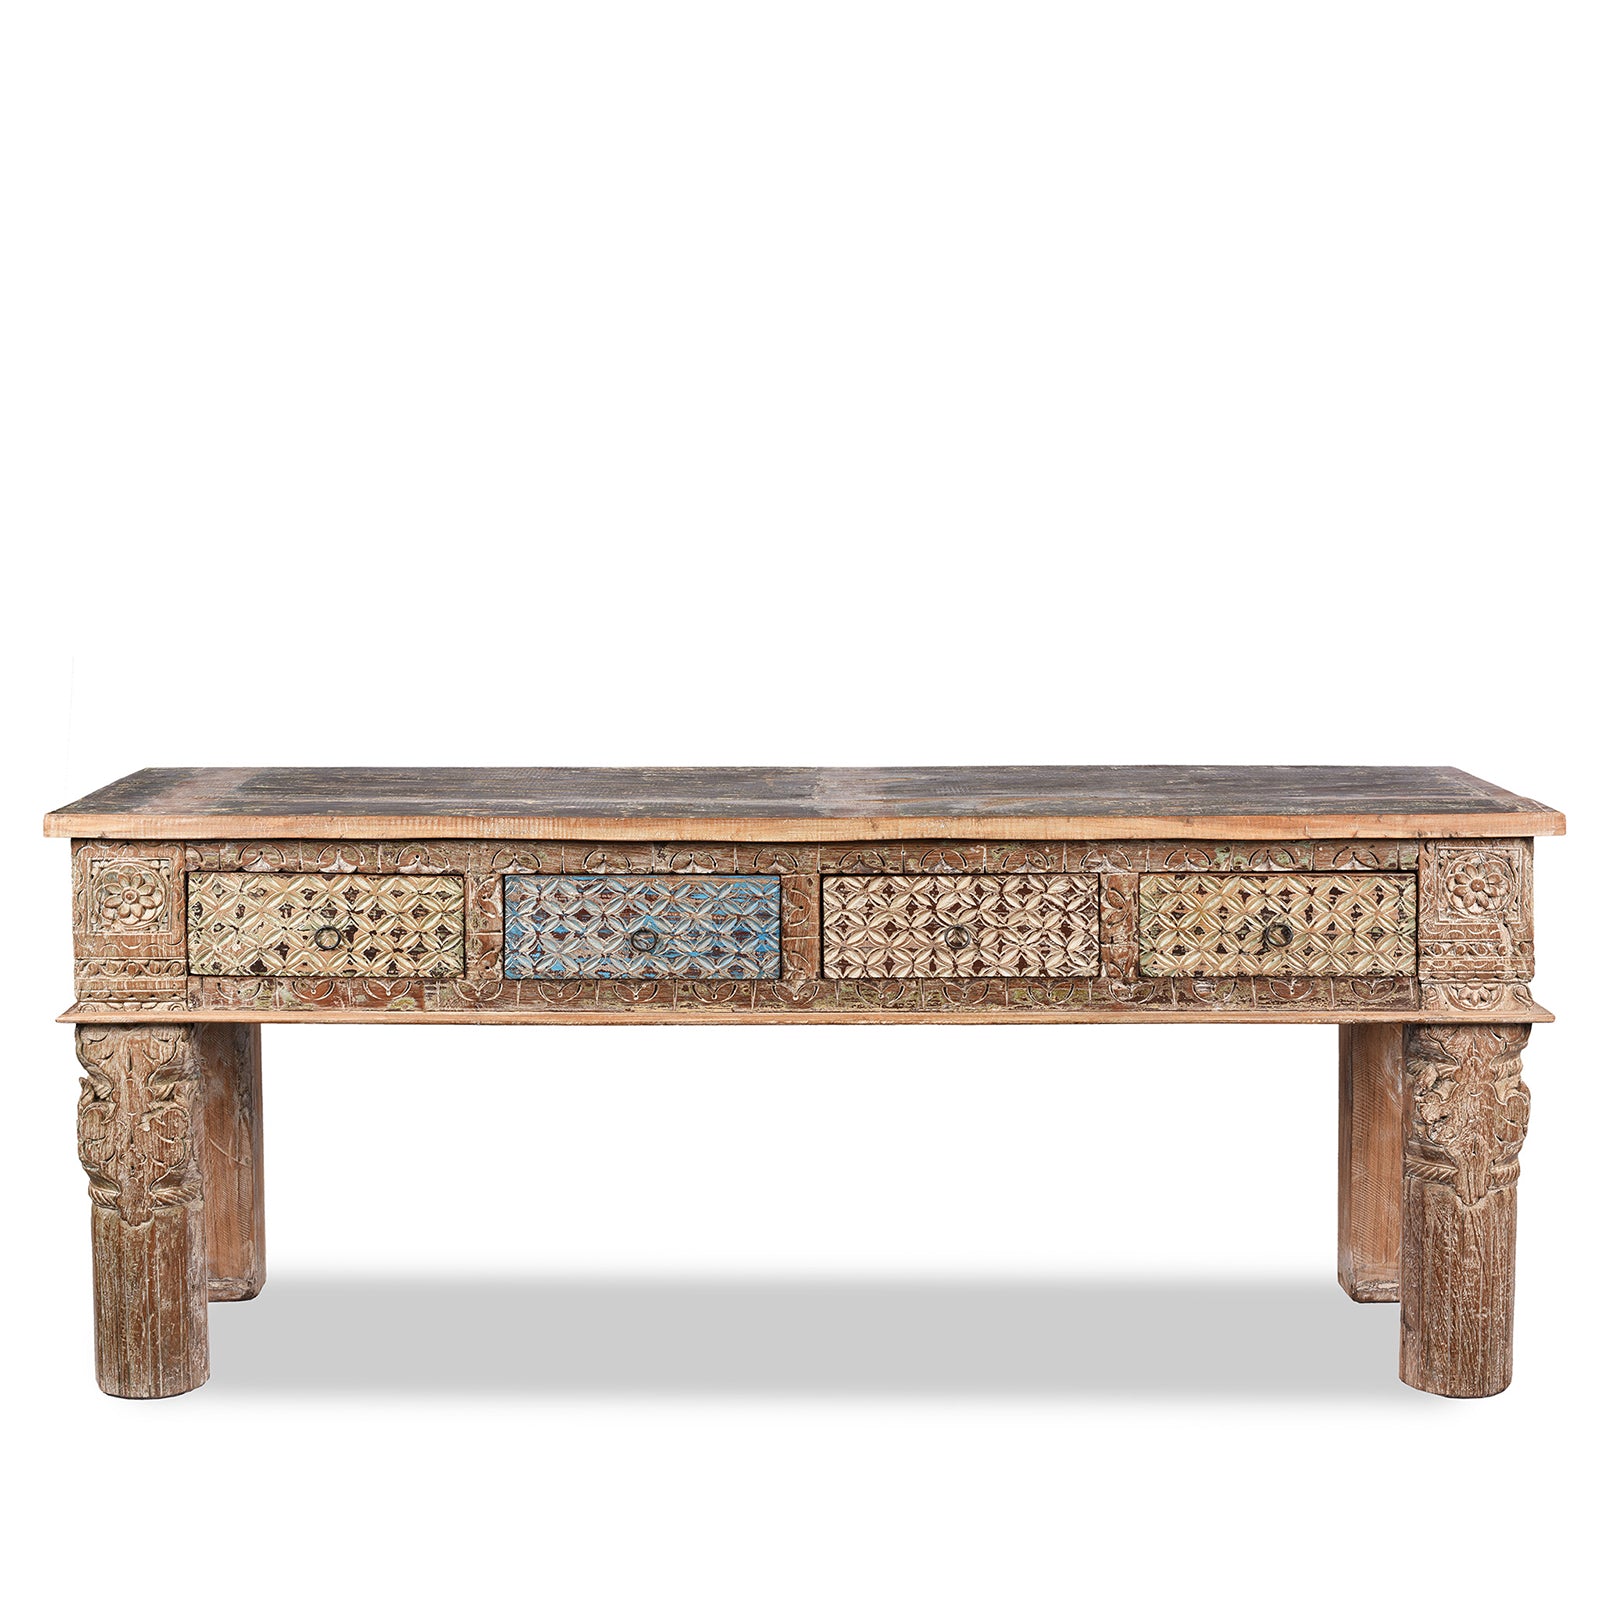 Reclaimed Four Drawer Teakwood Console Table With Painted Finish | Indigo Antiques